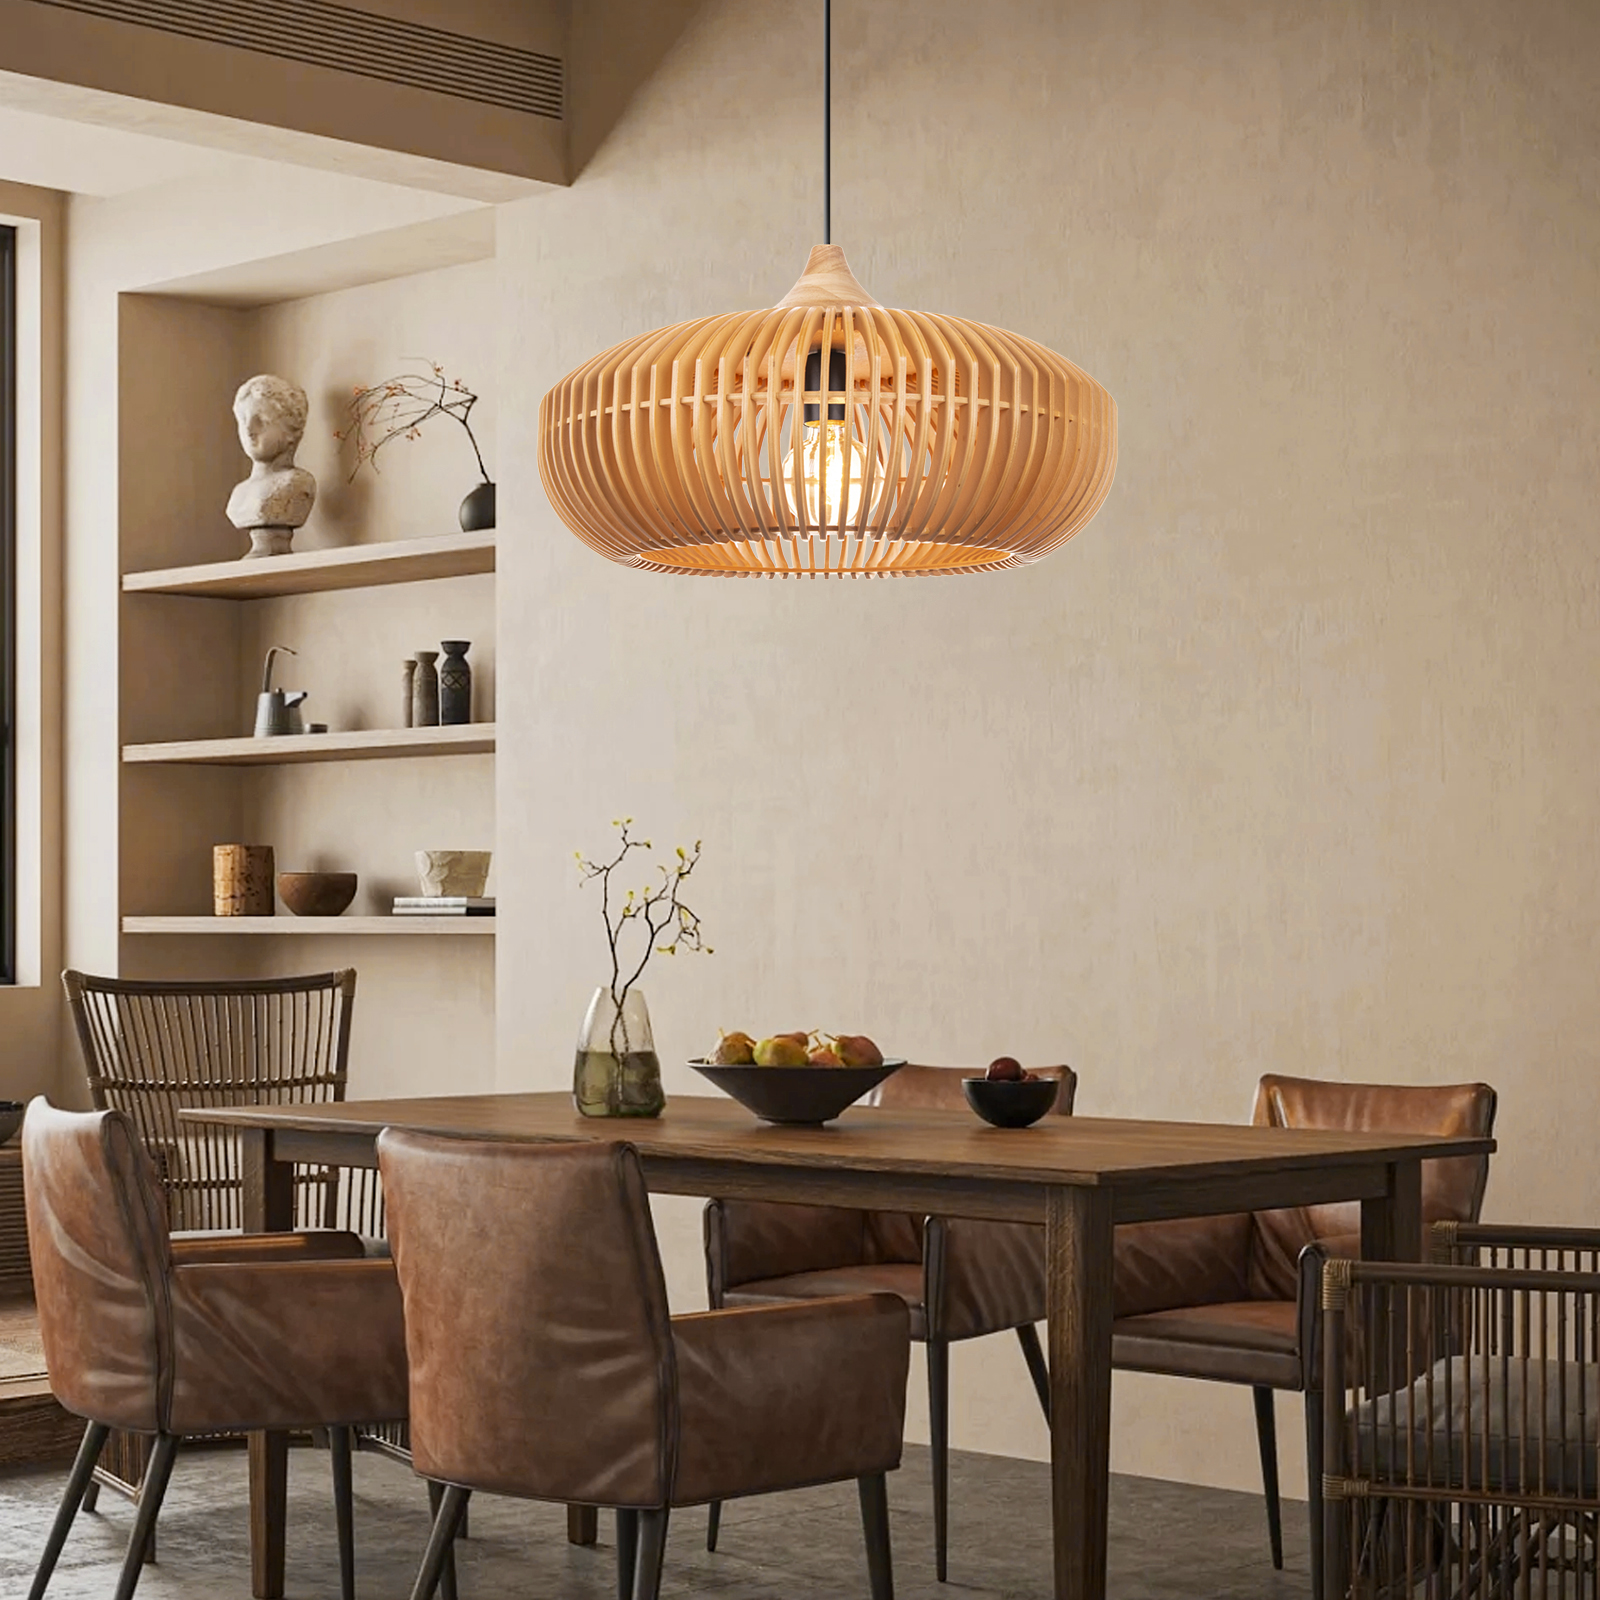 Japanese Solid Wood High Quality Pendant Light